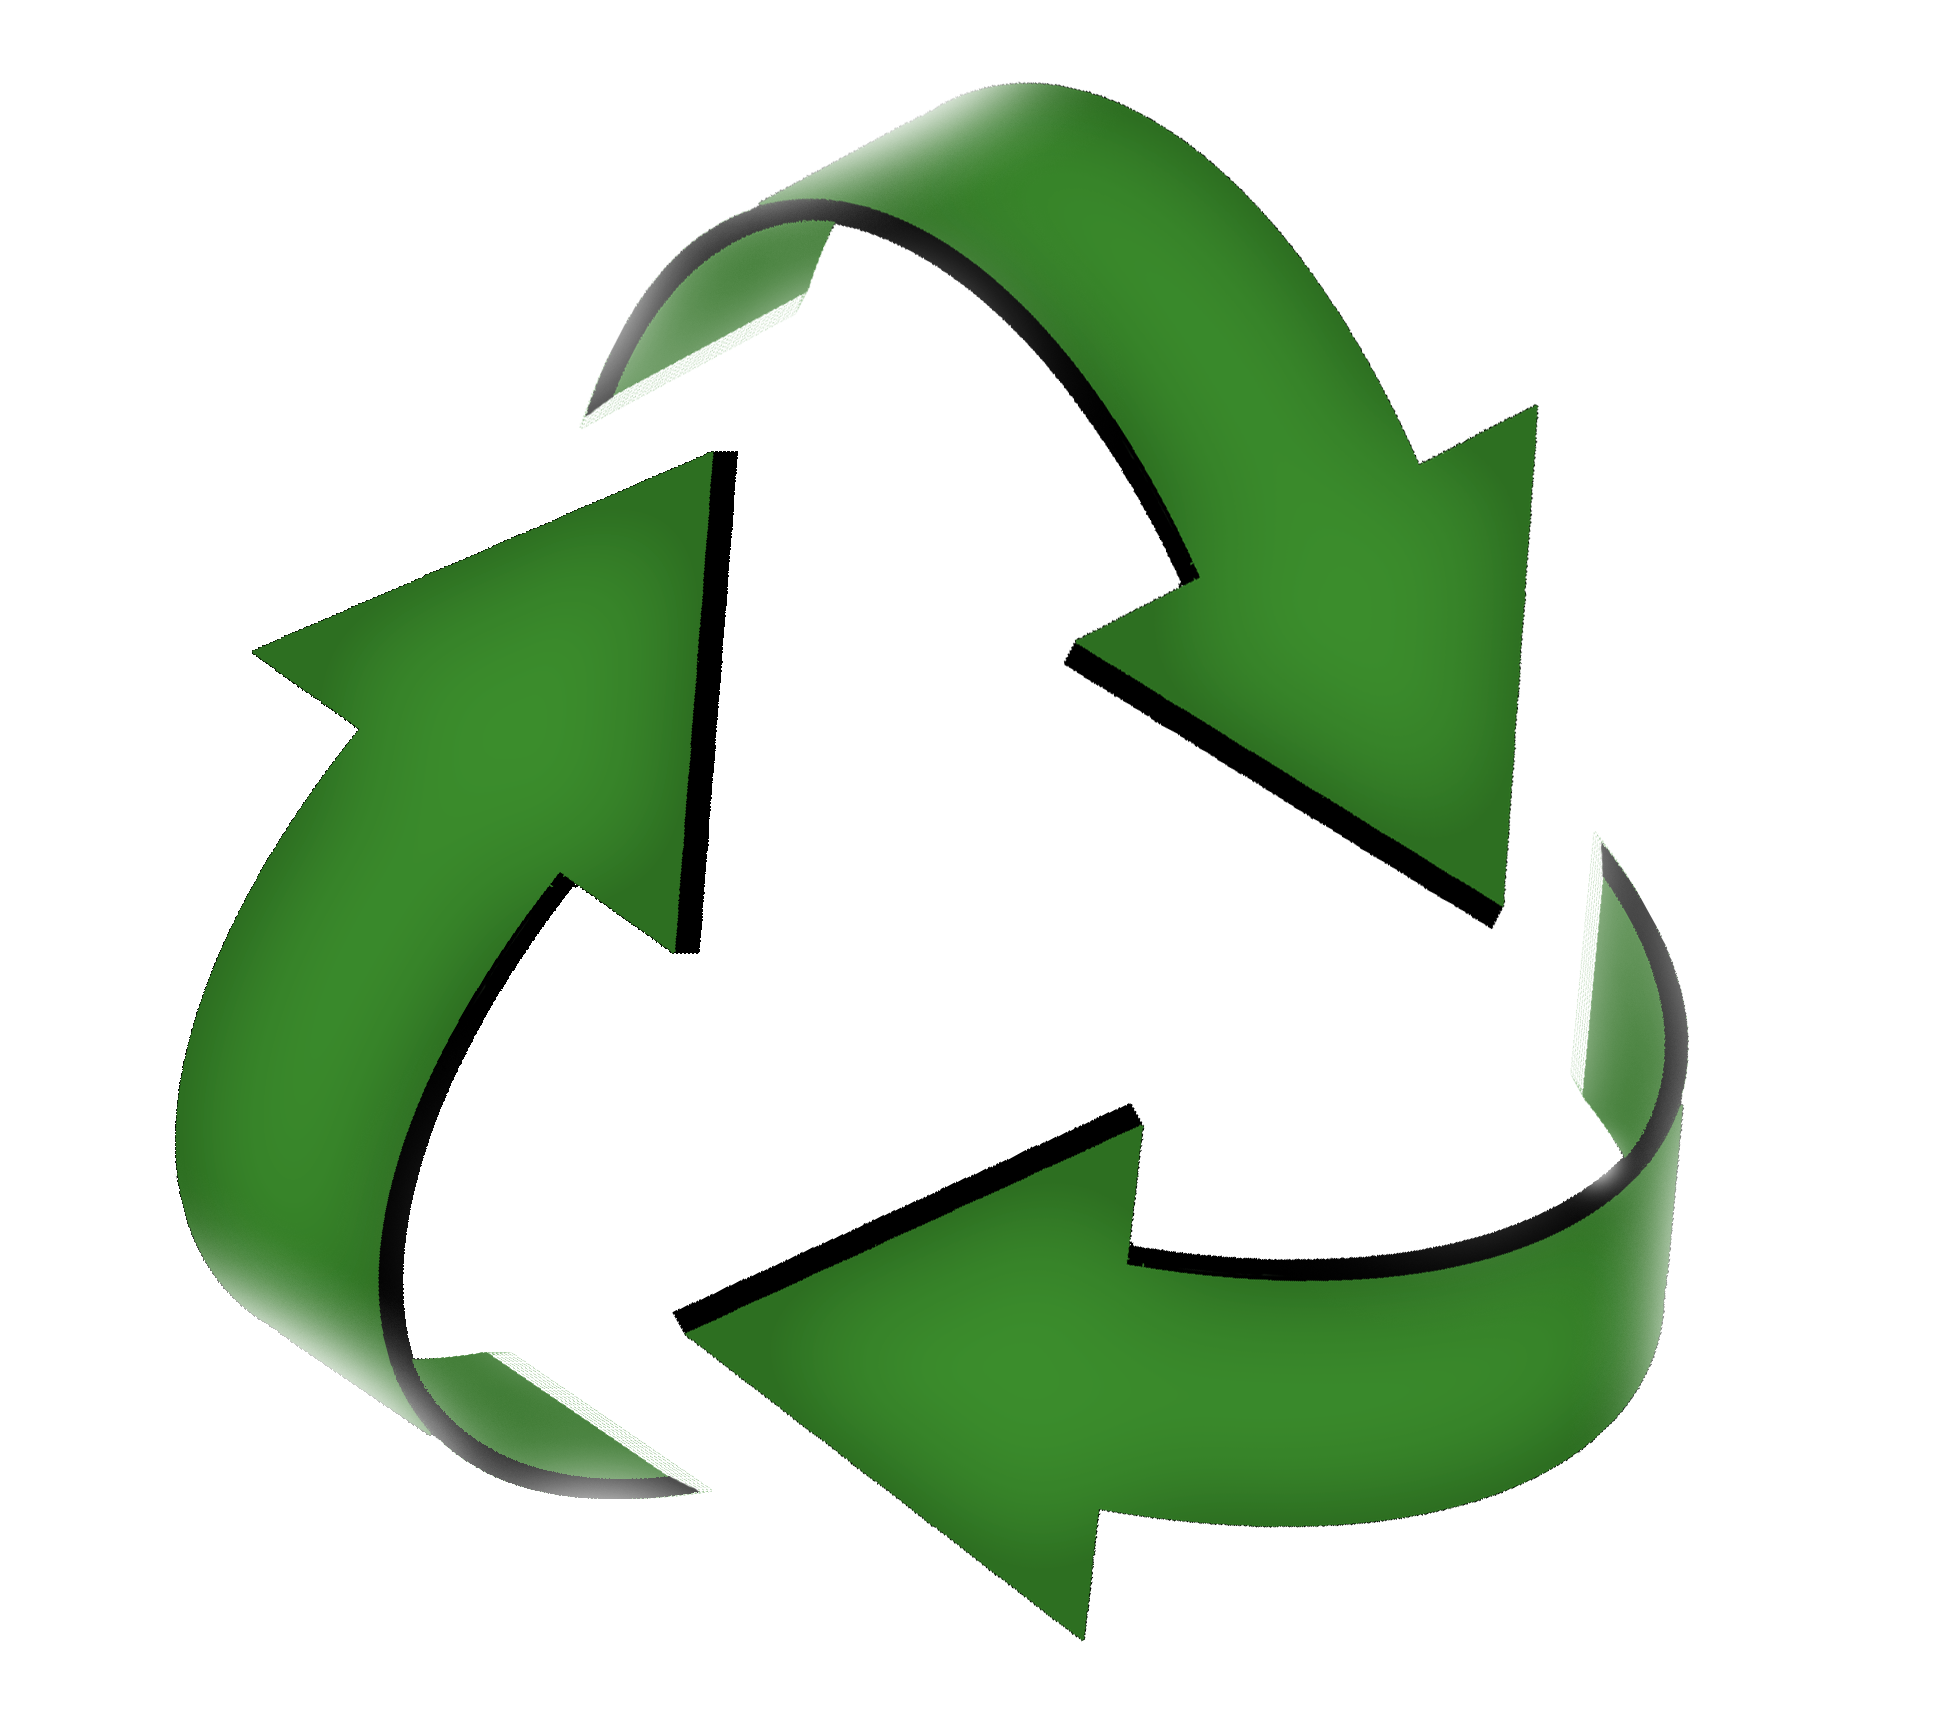 Recycling Symbol Printable | Free Download Clip Art | Free Clip ...